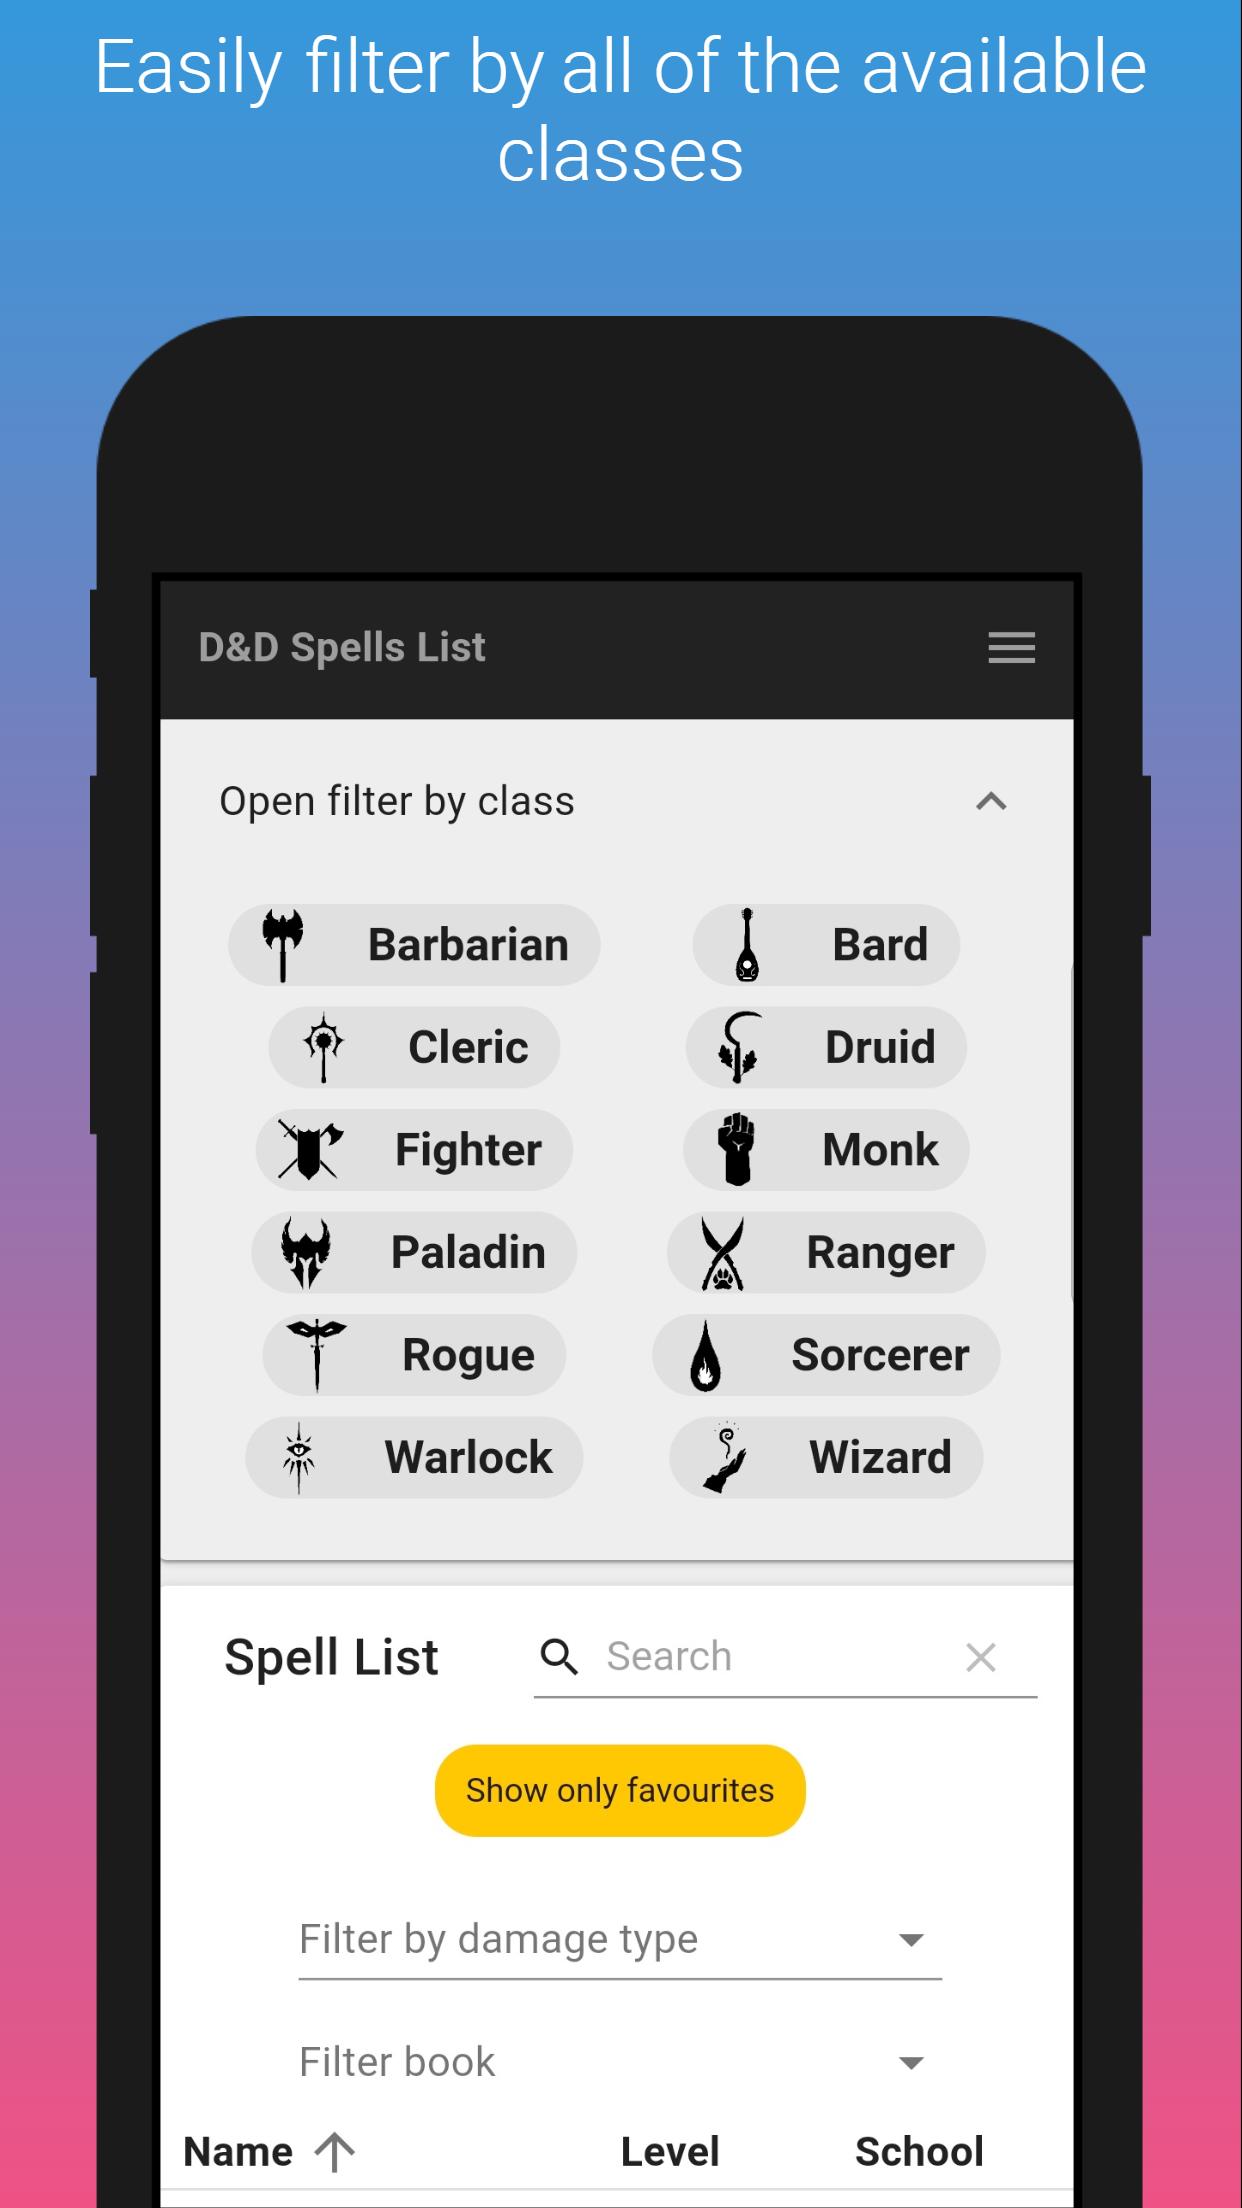 D&D Spells List for Android - APK Download